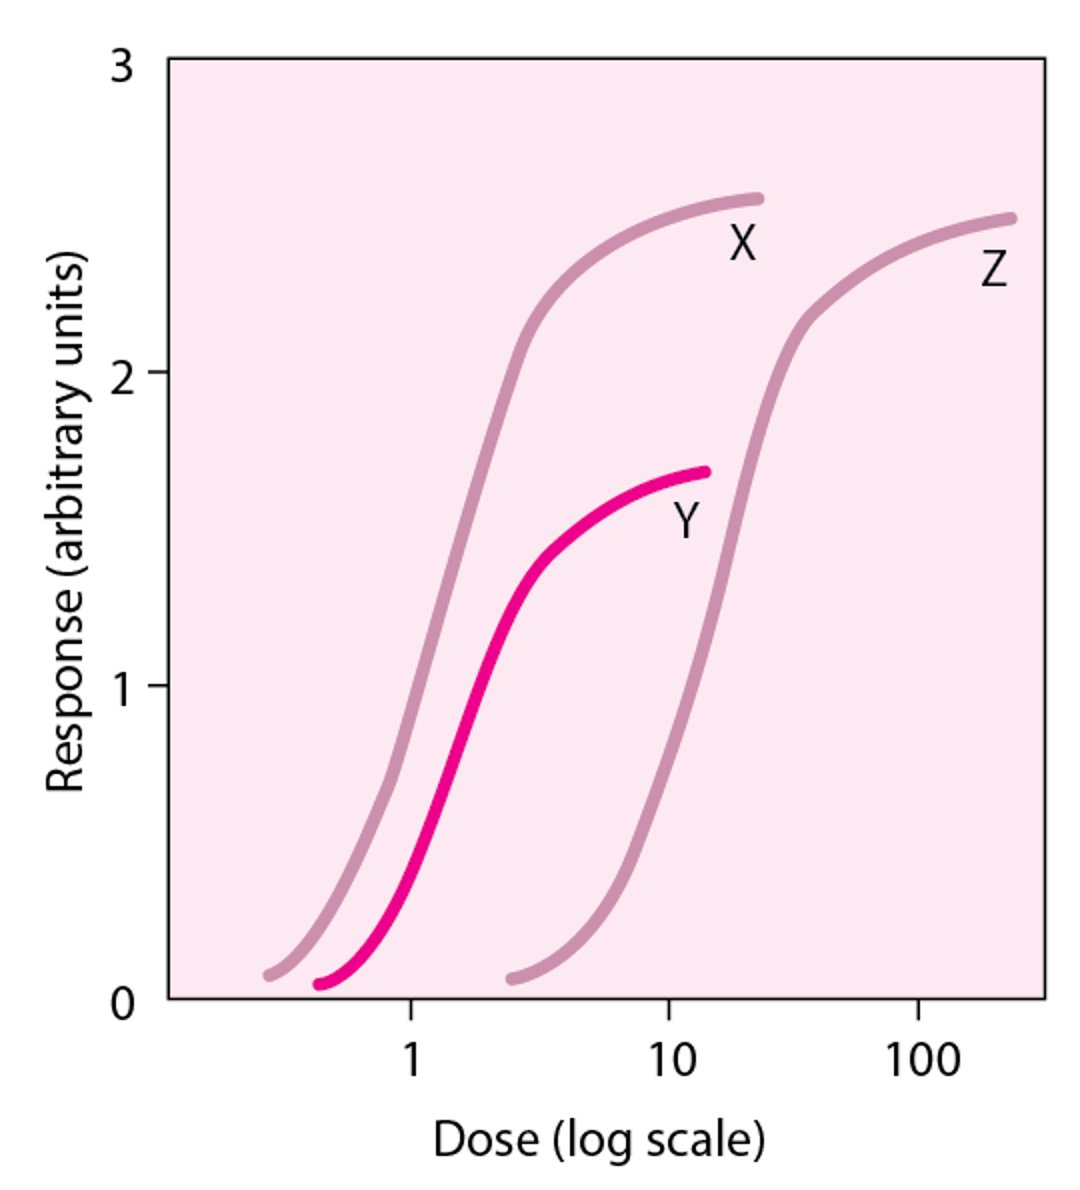 Comparison of Dose-Response Curves for Drugs X, Y, and Z